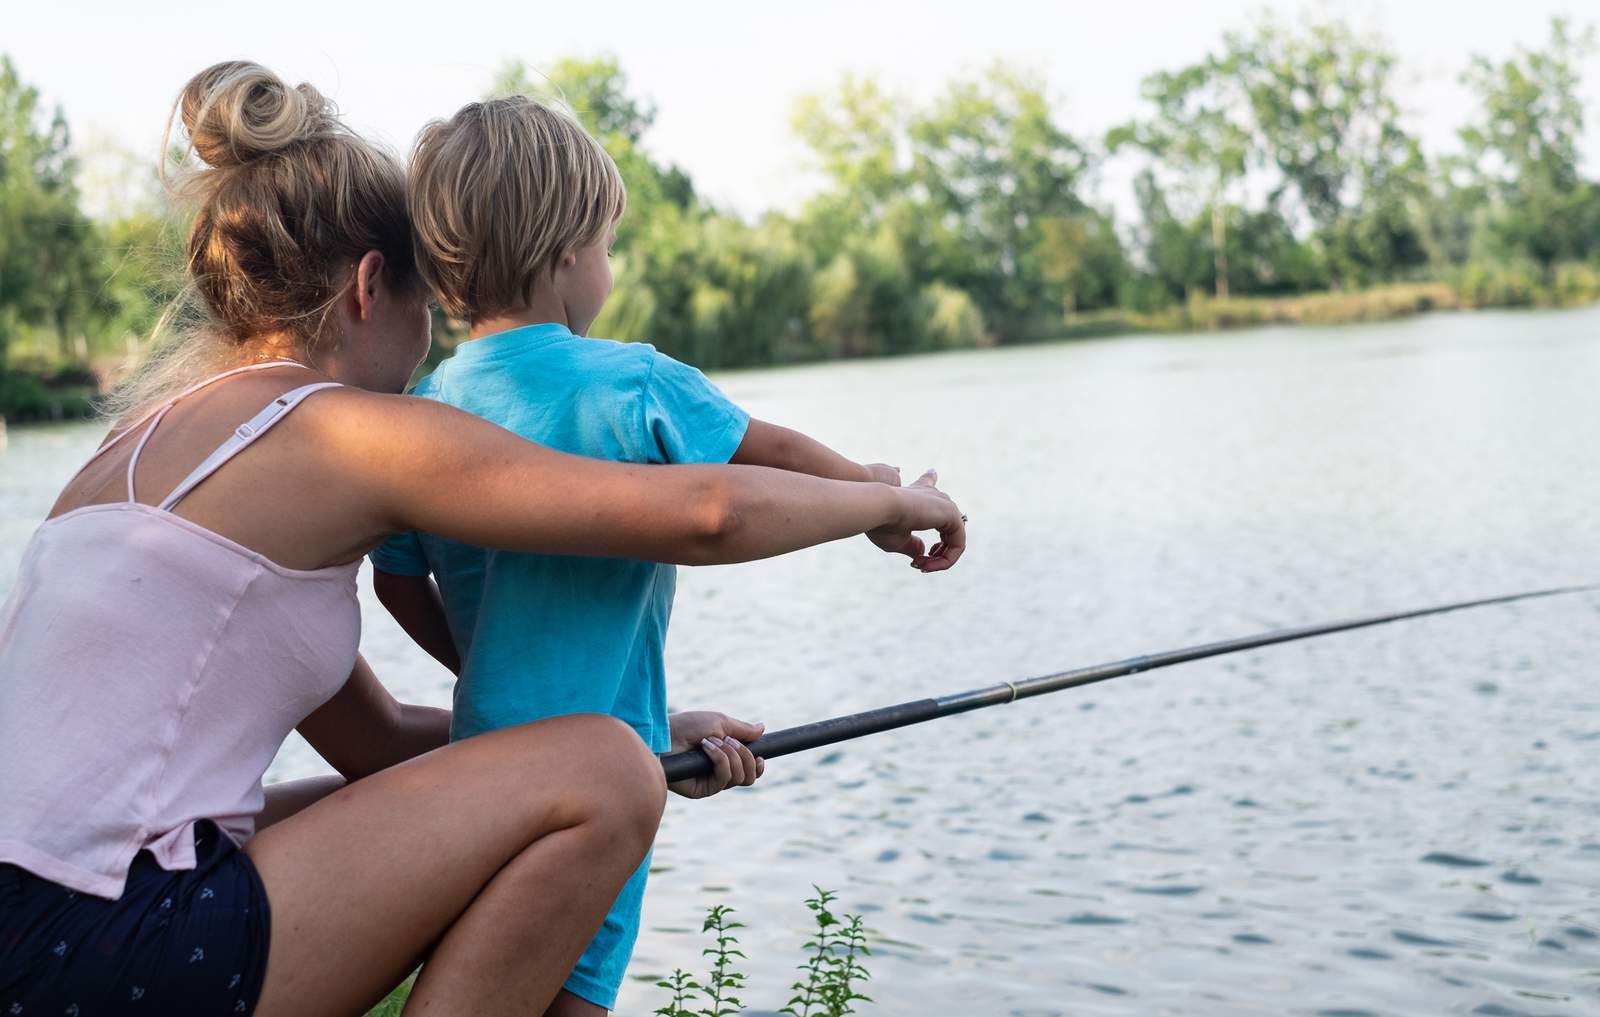 Here are 4 Pearland ponds you can fish at while social distancing